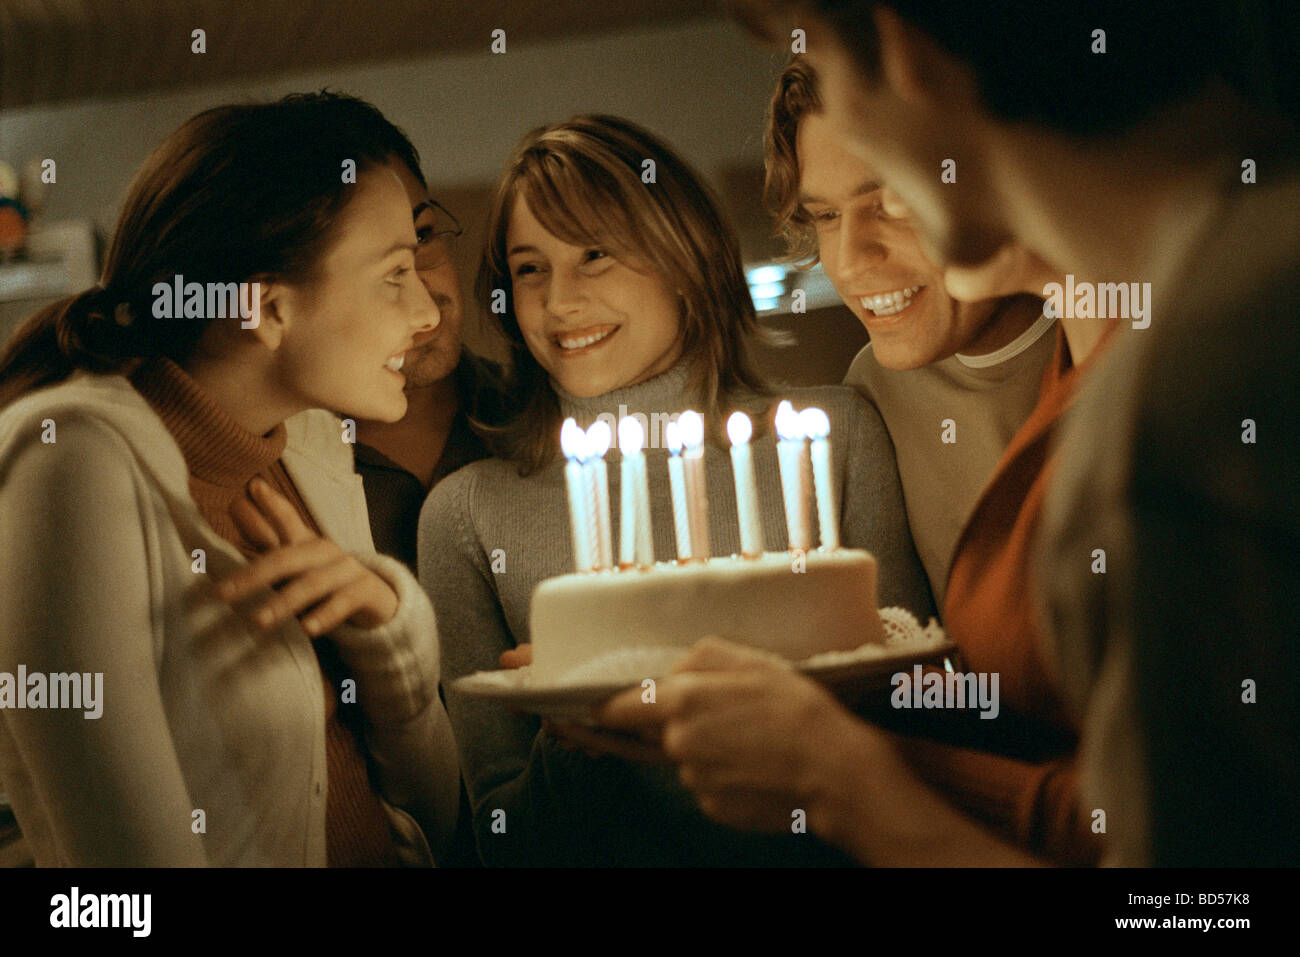 Birthday cake with lit candles being presented to young woman Stock Photo